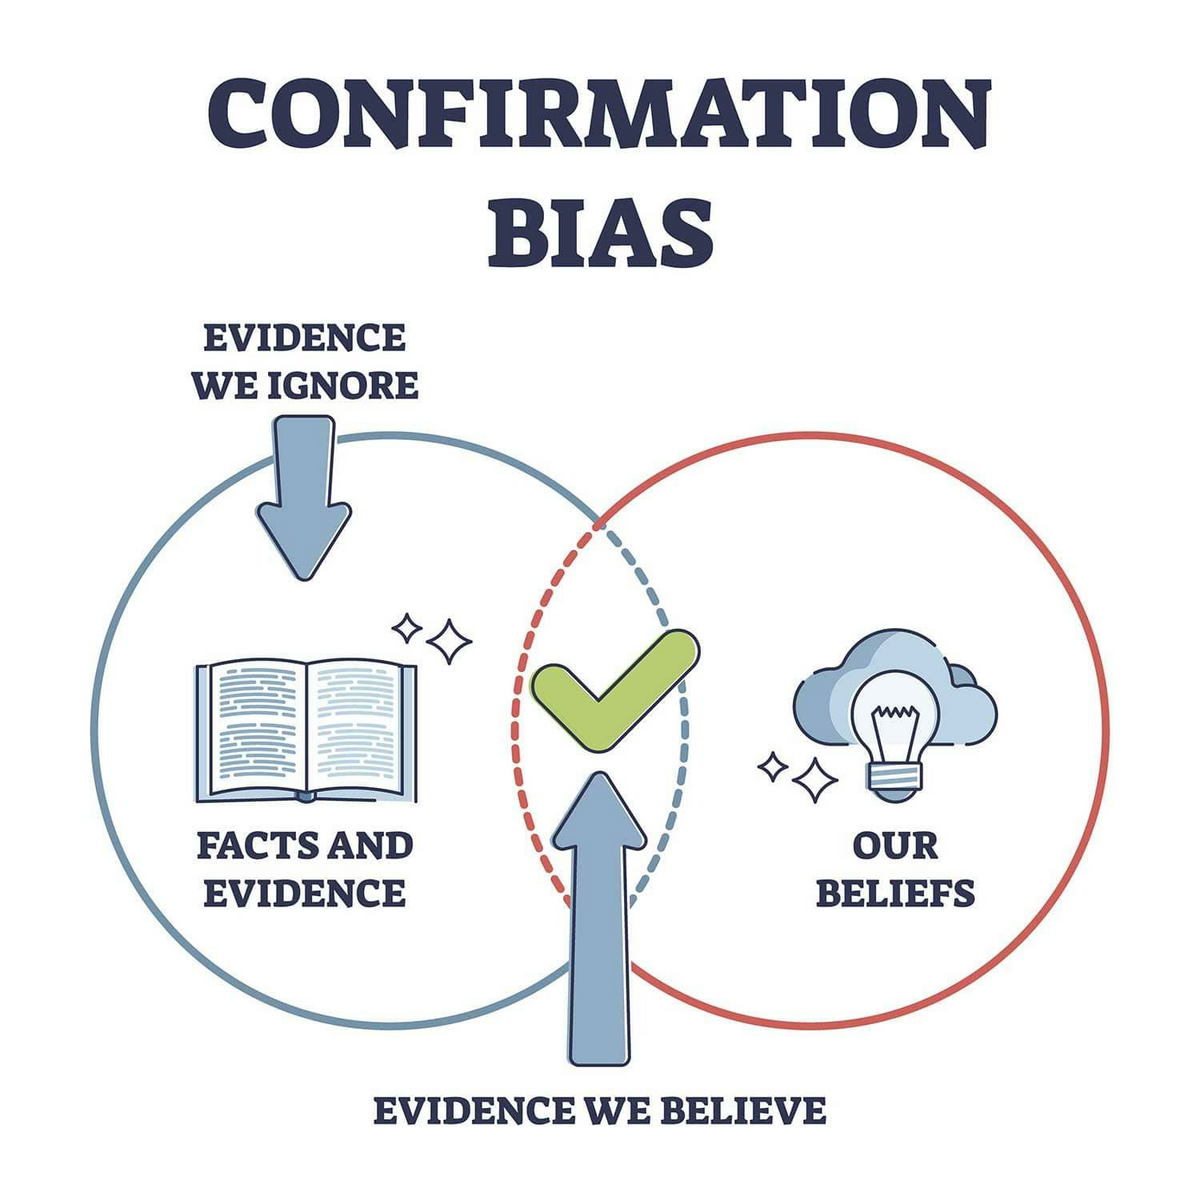 Confirmation bias as psychological objective attitude issue outline diagram. Incorrect information checking or aware of self interpretation vector illustration. Tendency to approve existing opinion.